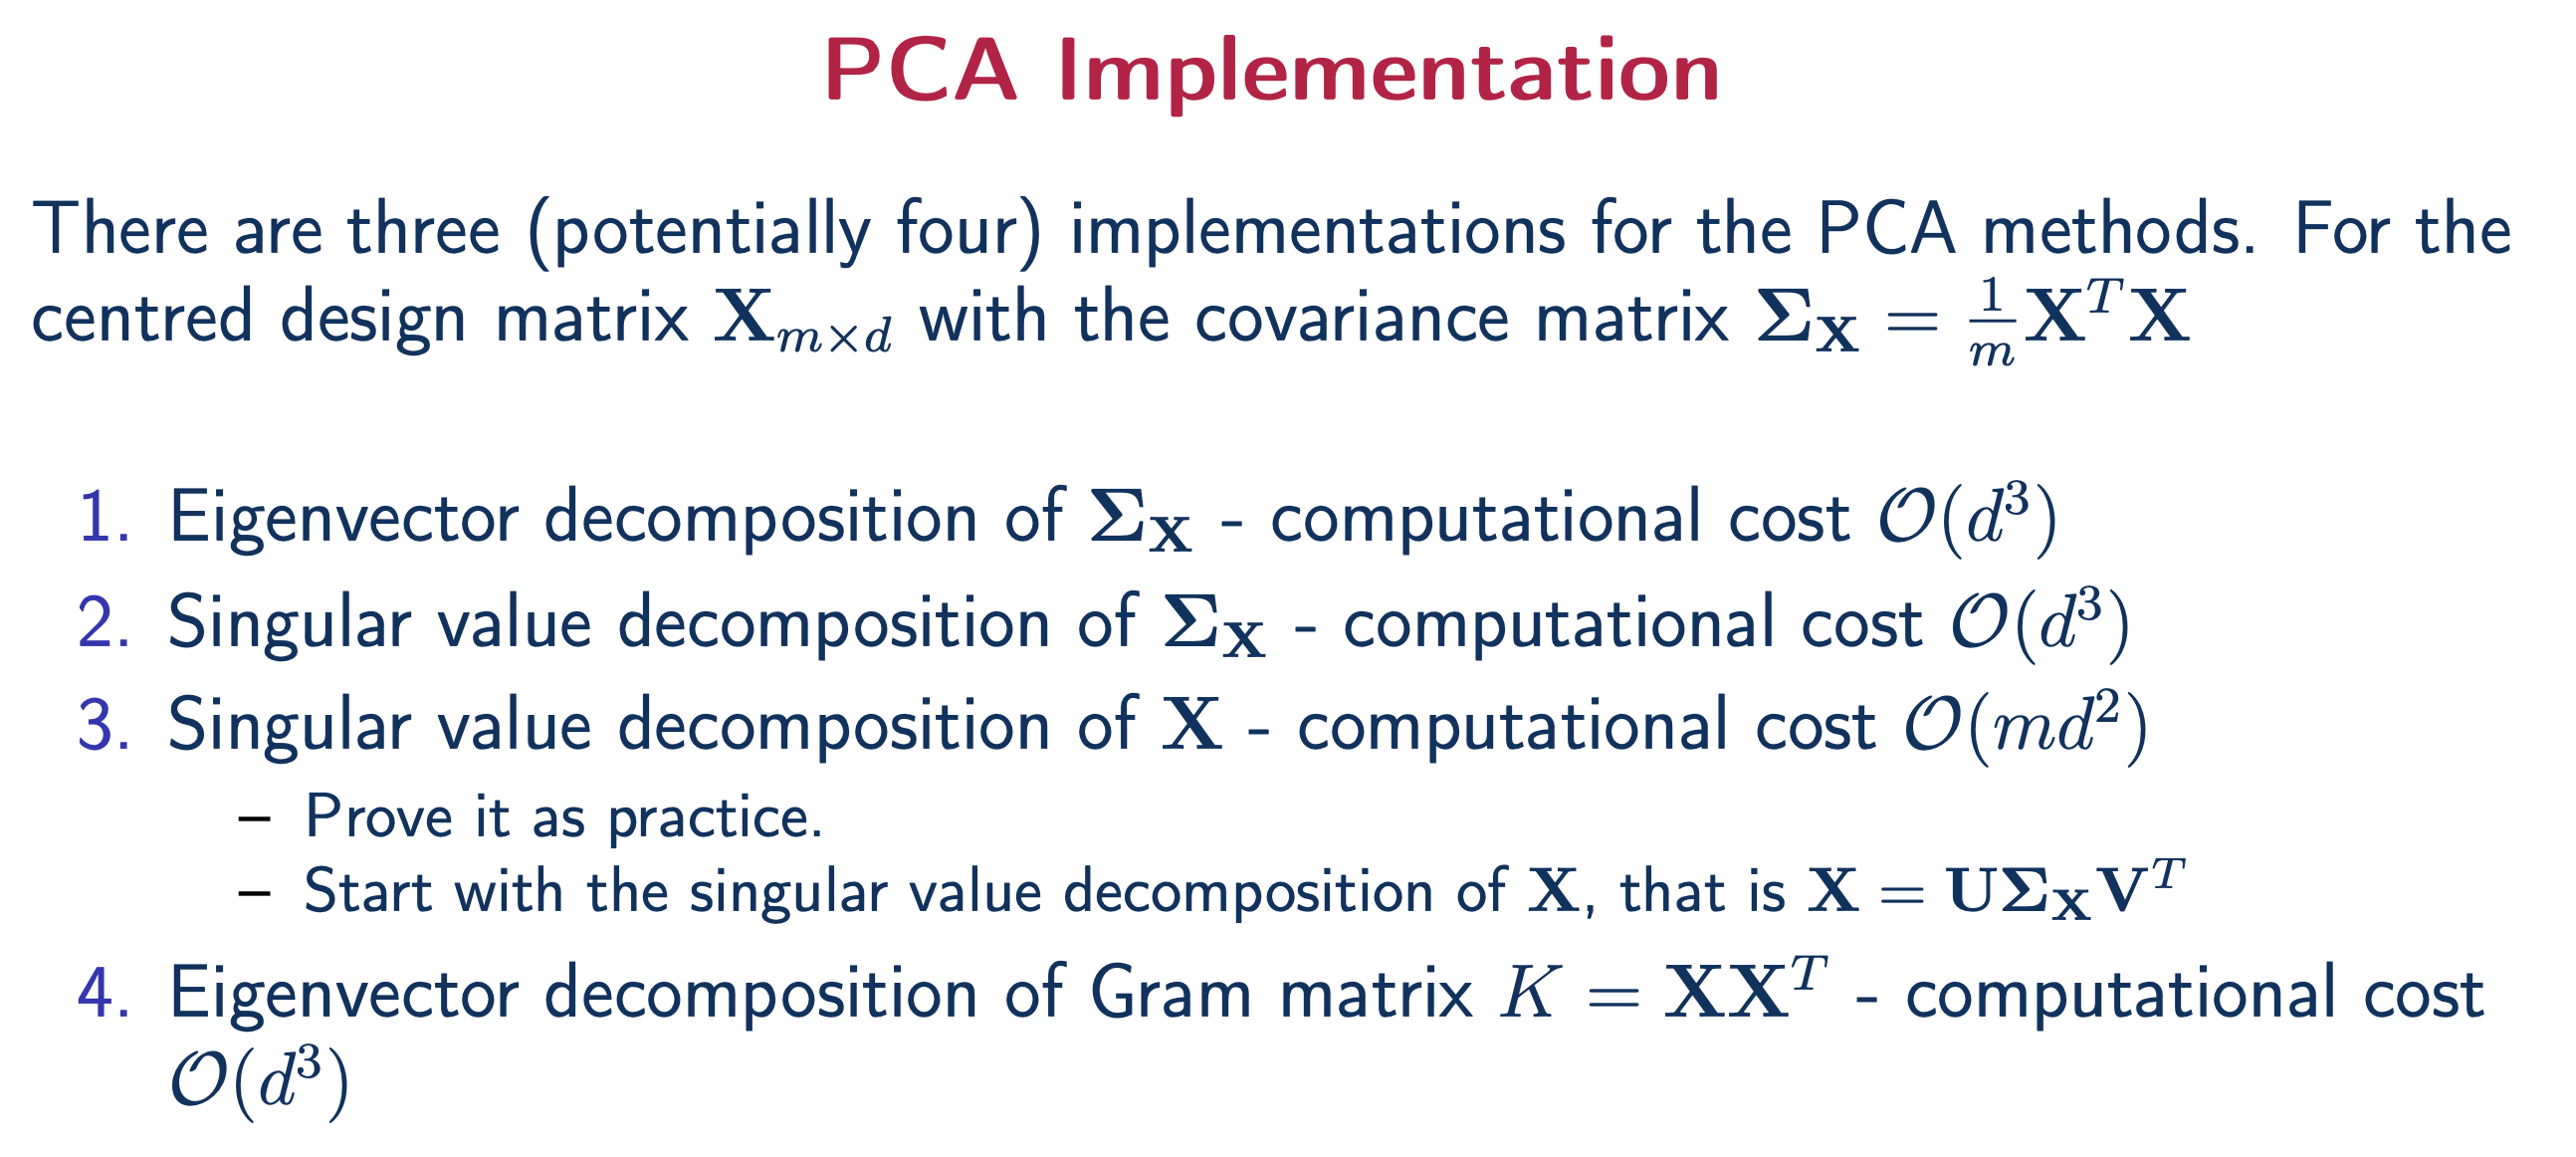 pca_implementations